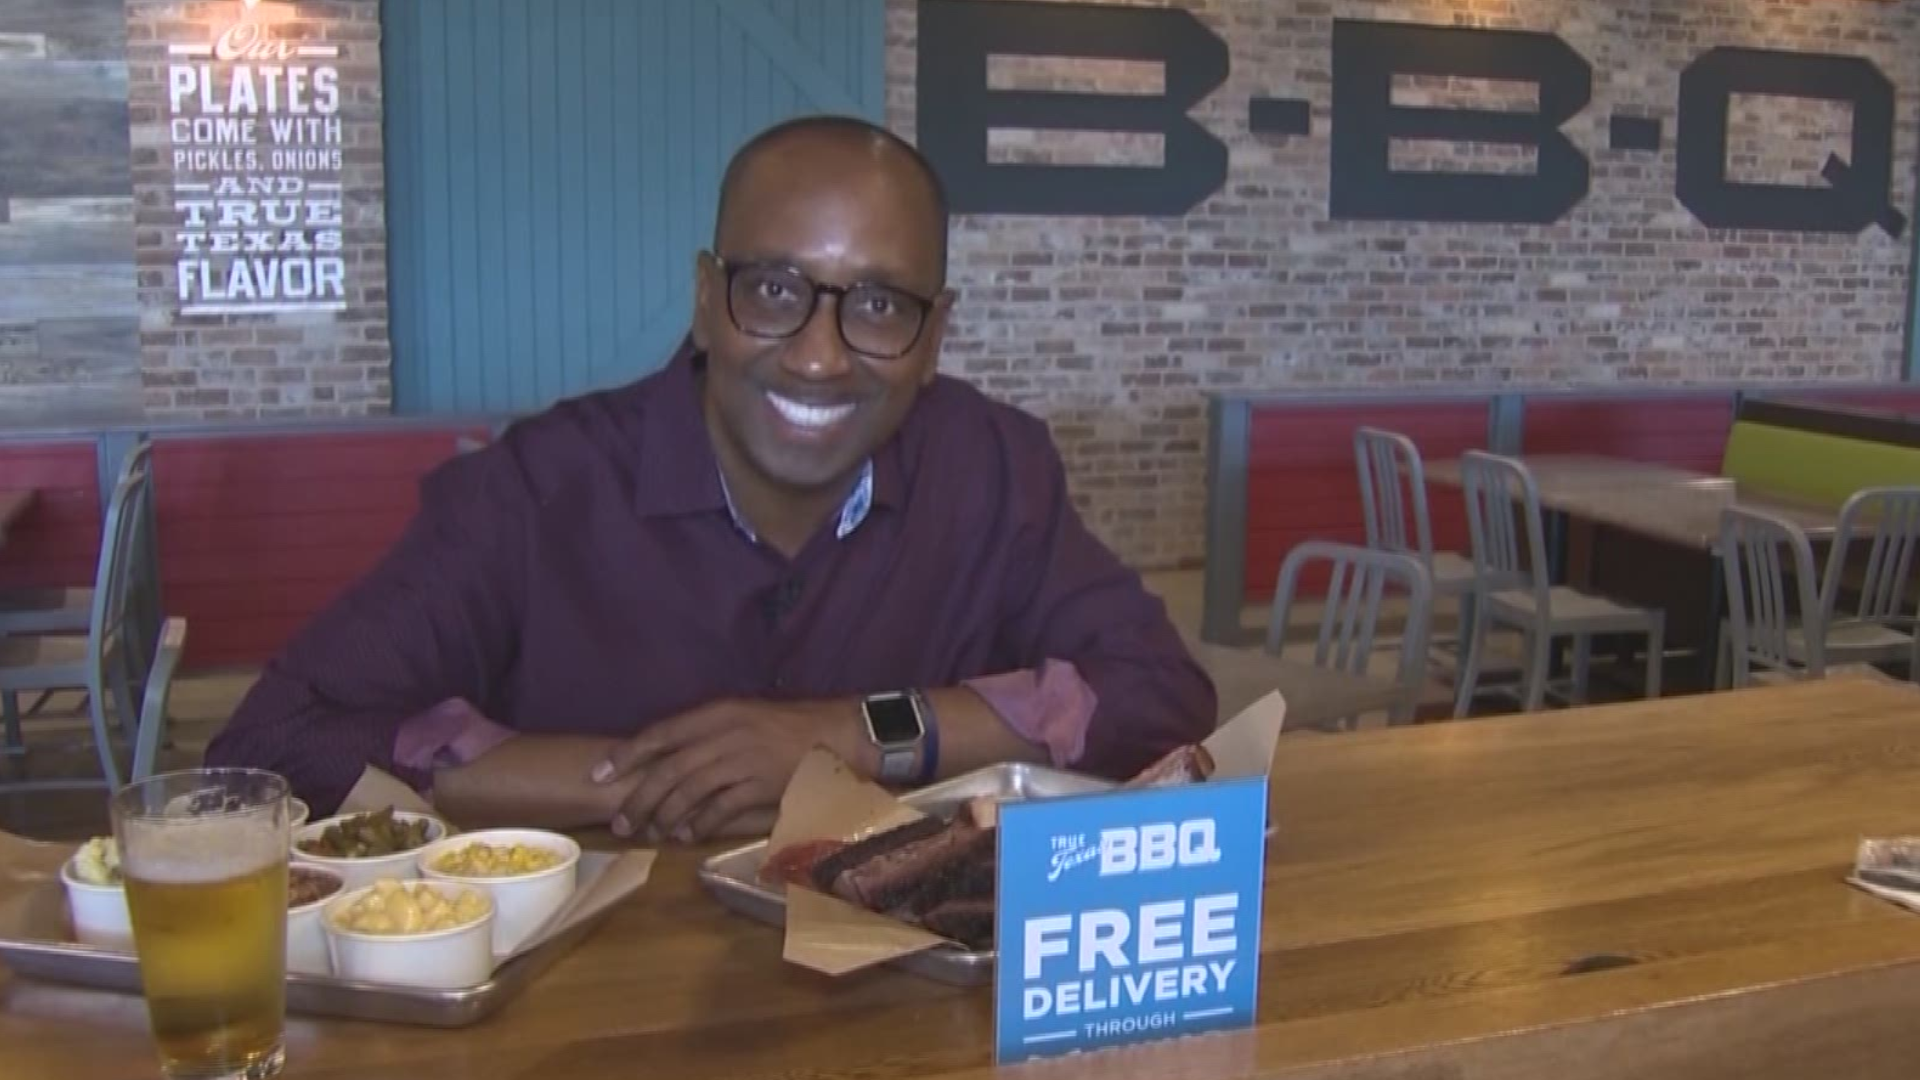 We're taking recommendations from viewers on where to go on our Great Grills Almighty Tour. This week we're checking out a good ol' fashioned BBQ joint located deep in the heart of... H-E-B.